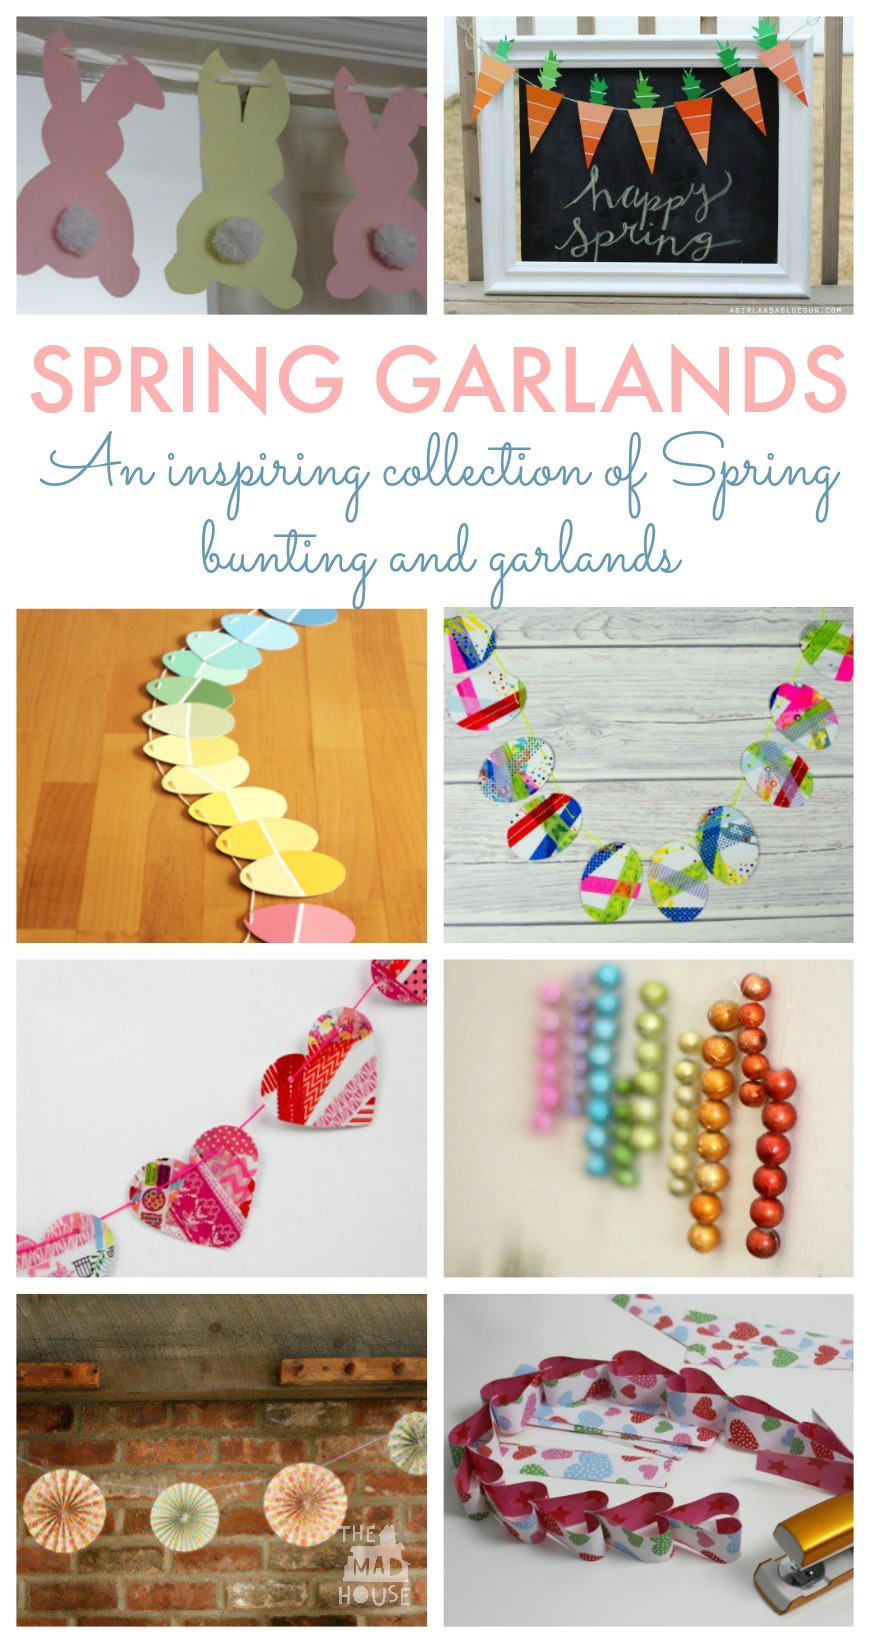 Celebrate Spring with this selection of DIY garlands and bunting. A wonderful collection of bunting and garlands for Spring